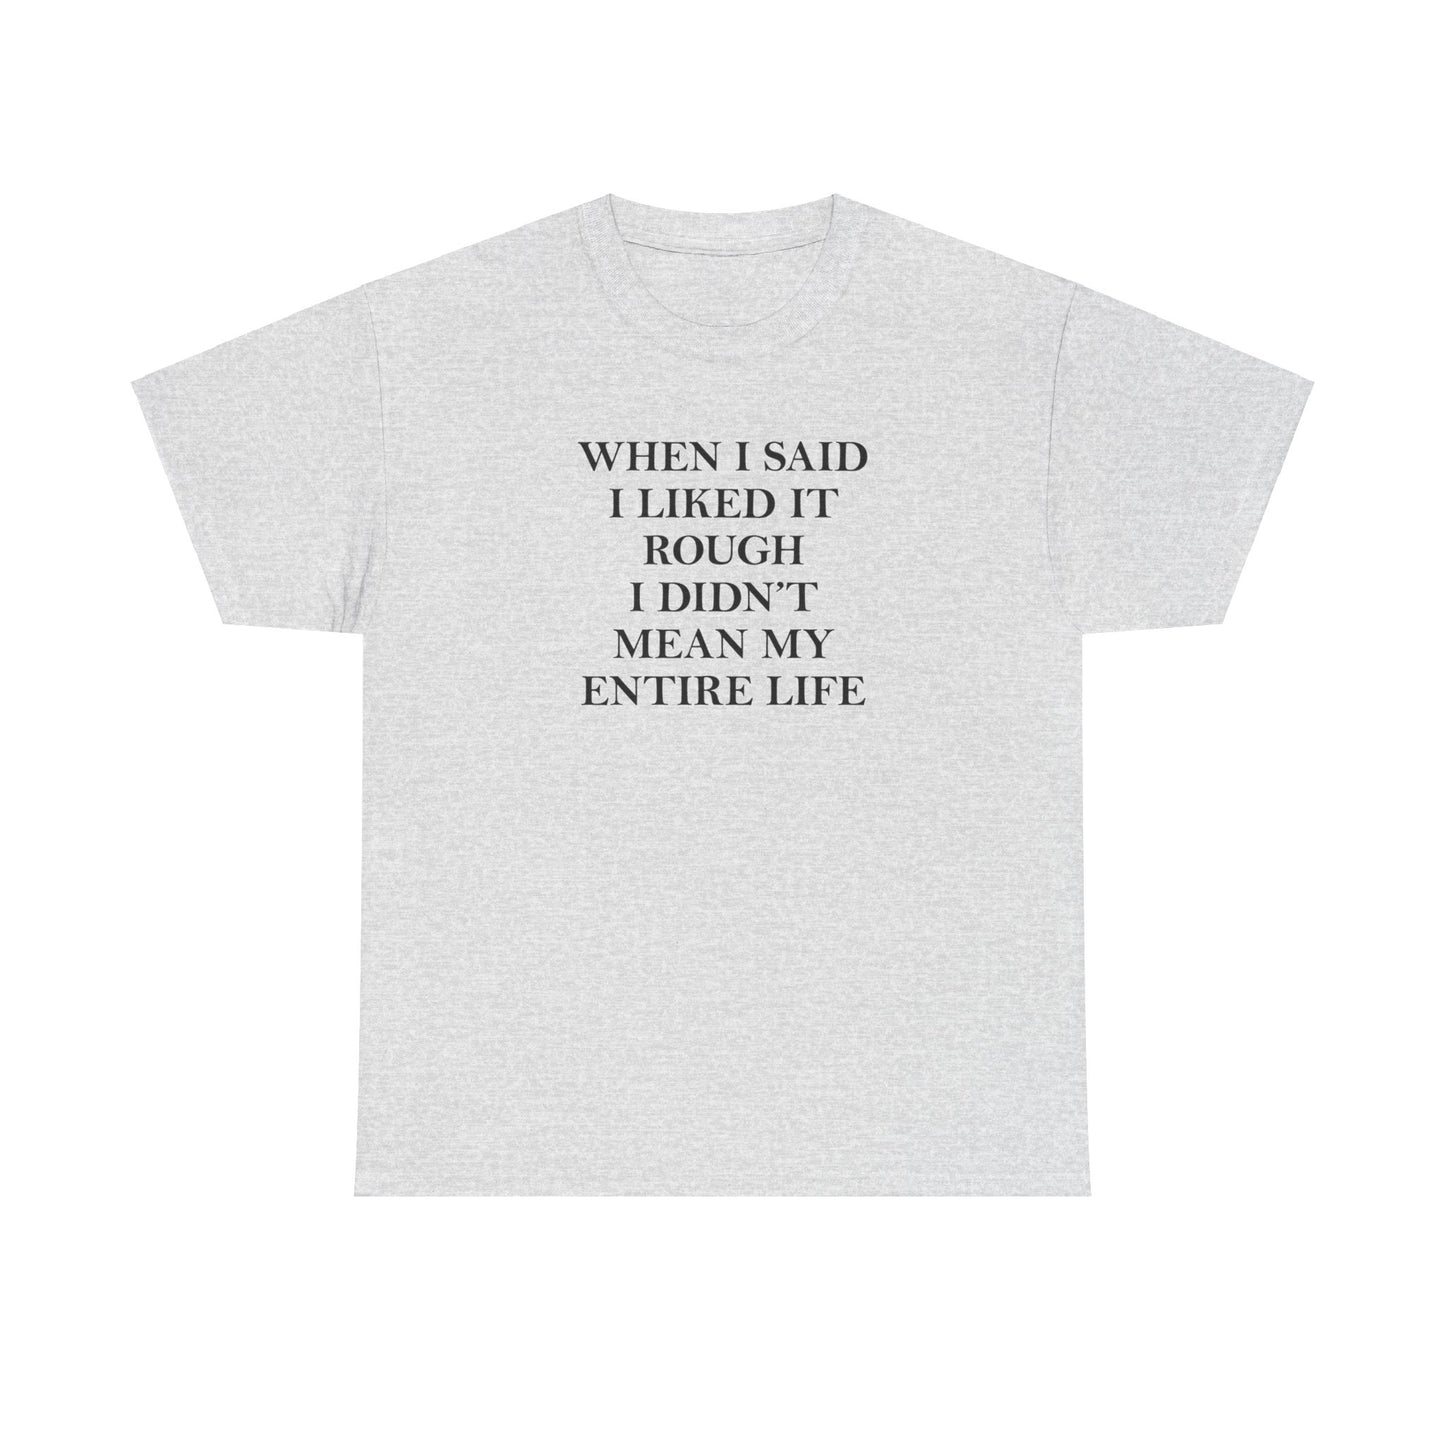 WHEN I SAID I LIKED IT ROUGH I DIDN'T MEAN MY ENTIRE LIFE T-SHIRT